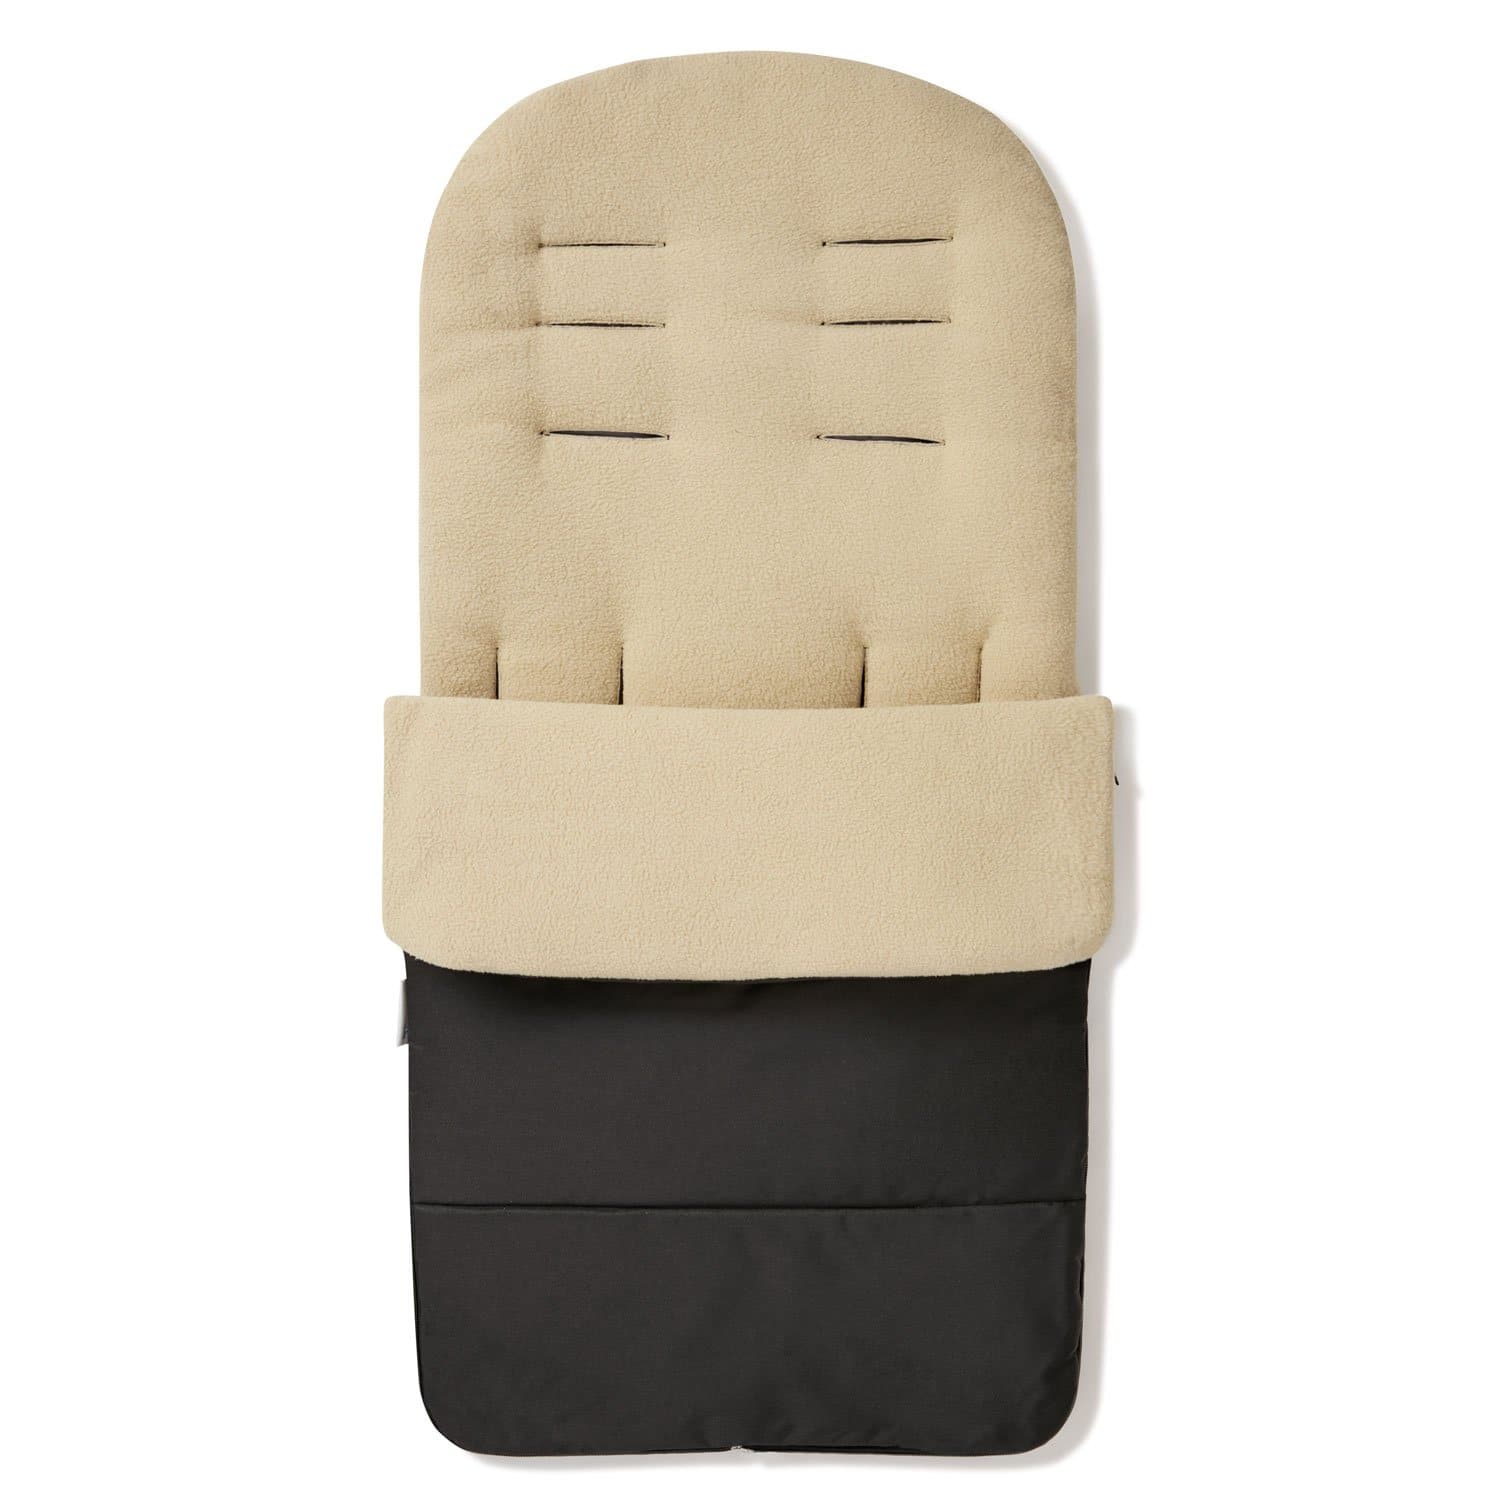 Premium Footmuff / Cosy Toes Compatible with Pericles - Desert Sand / Fits All Models | For Your Little One